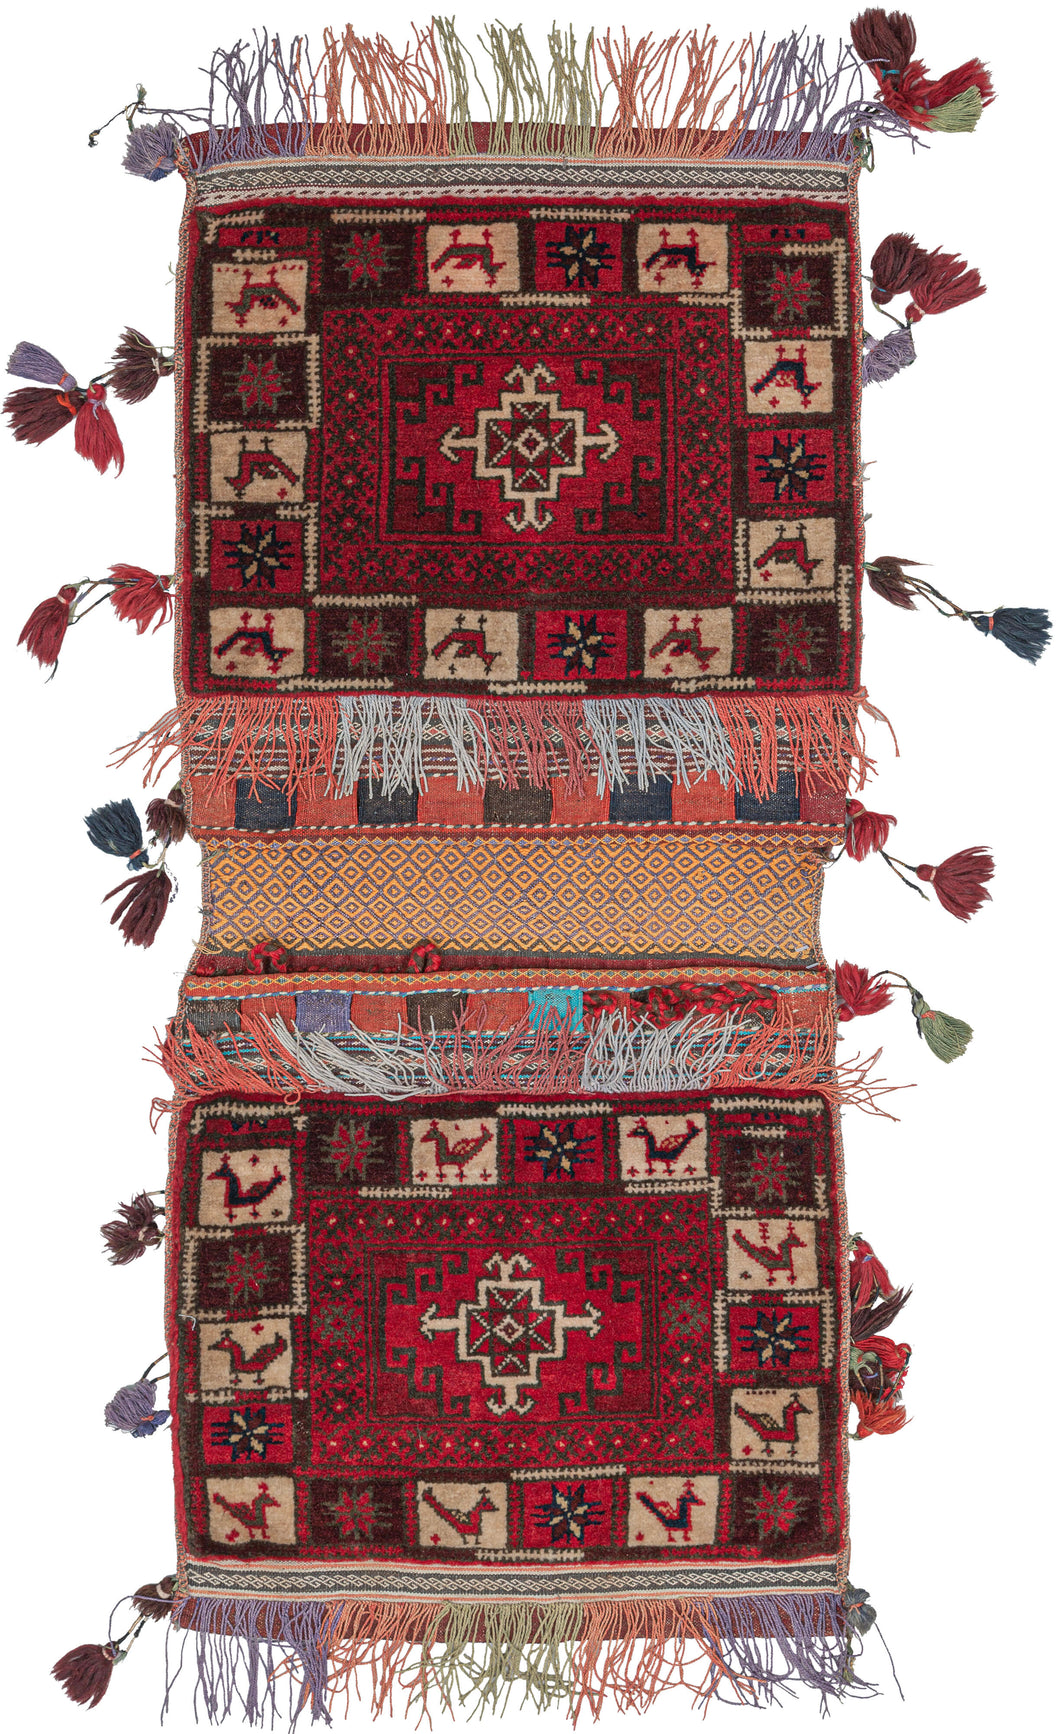 The bag face is a low and dense pile with a flatwoven back in a purple and yellow diamond pattern. The closure is composed of red and blue slit tapestry with braided loops. The bagface features a red, white, and brown geometric design, with a border featuring animals and stars. Multicolor fringe is on the tops and bottoms of both bag faces, with tassels along the sides. A truly whimsical piece. 